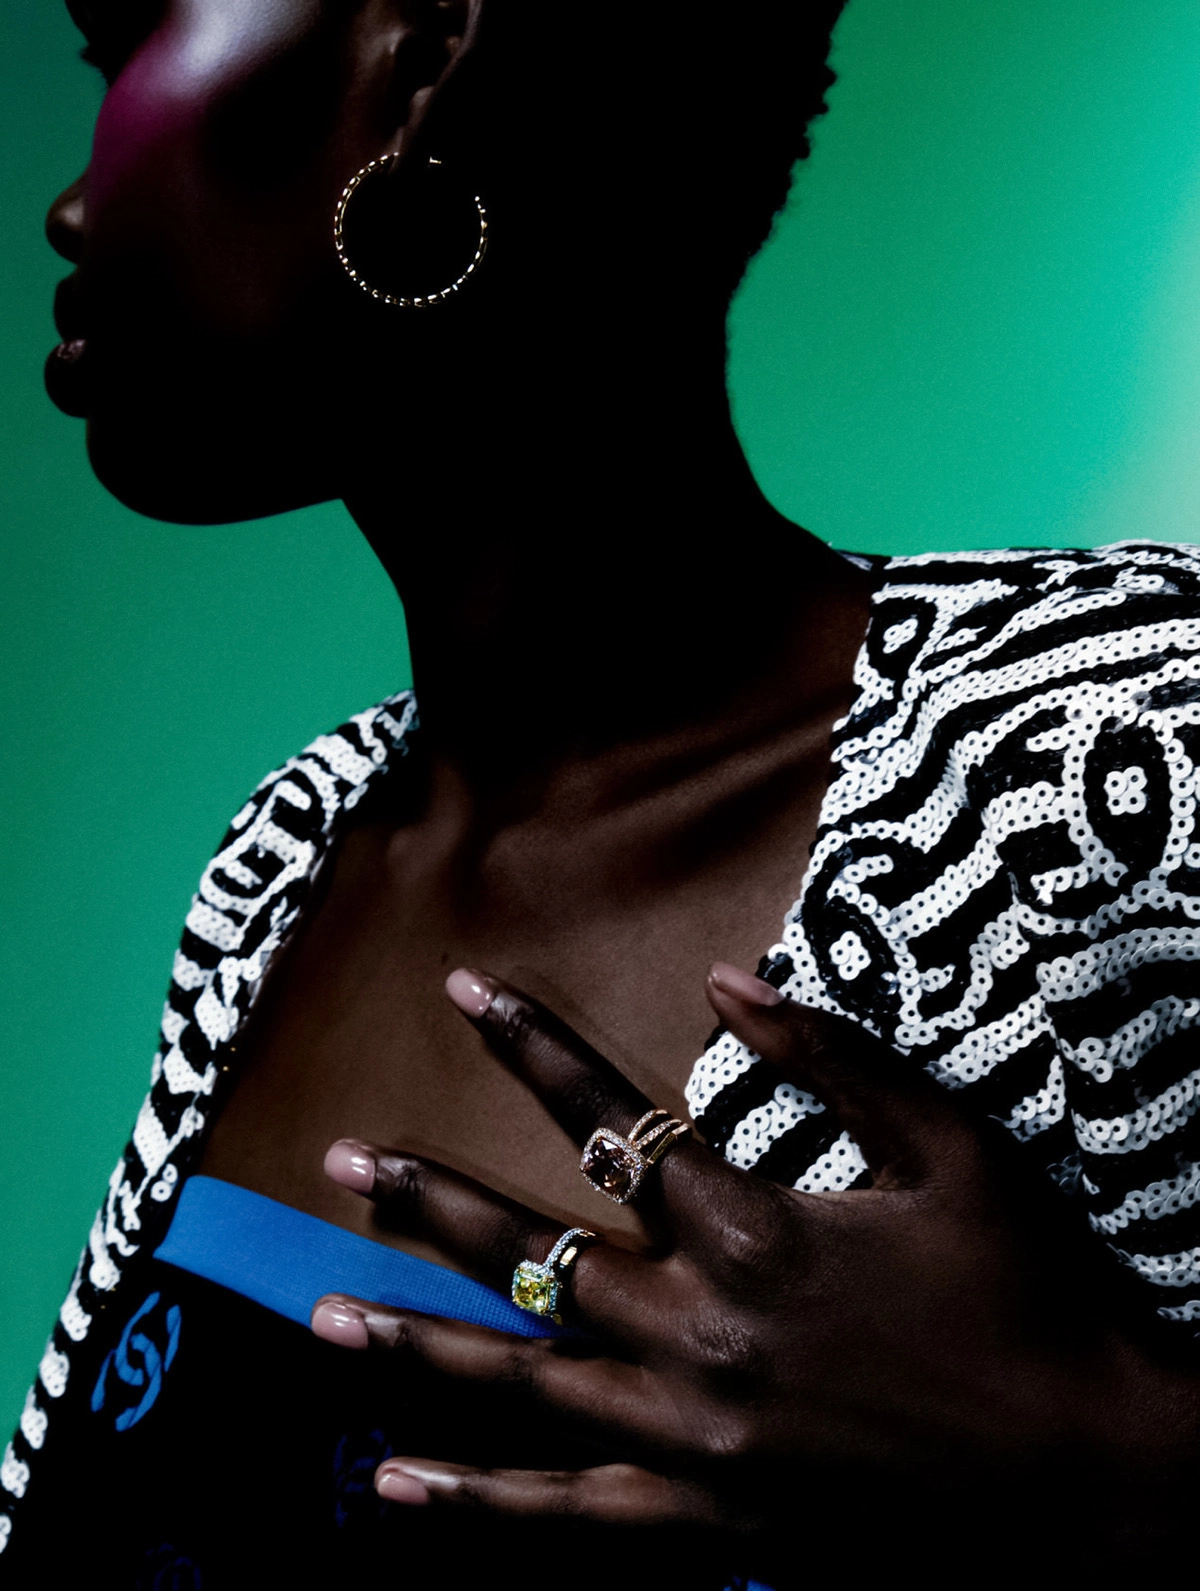 Adual Akol by Yis Kid for Elle UK June 2022